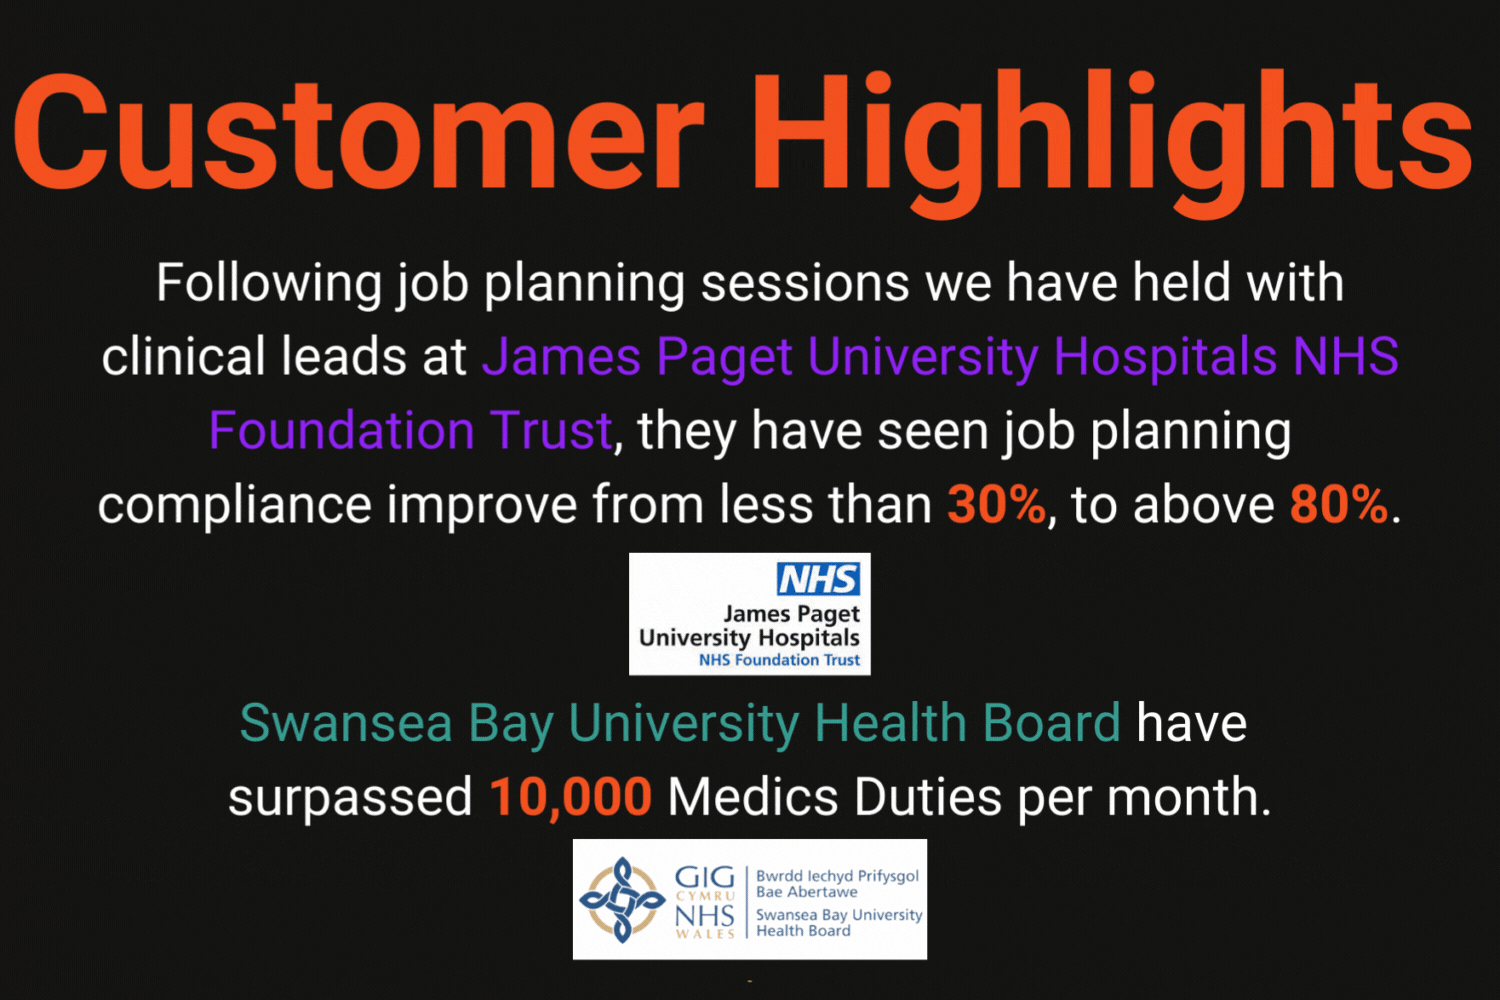 Customer Highlights Following job planning sessions we have held with clinical leads at James Paget University Hospitals NHS Foundation Trust, they have seen job planning compliance improve from less than 30%, to above 80%. Swansea Bay University Health Board have surpassed 10,000 Medics Duties per month.